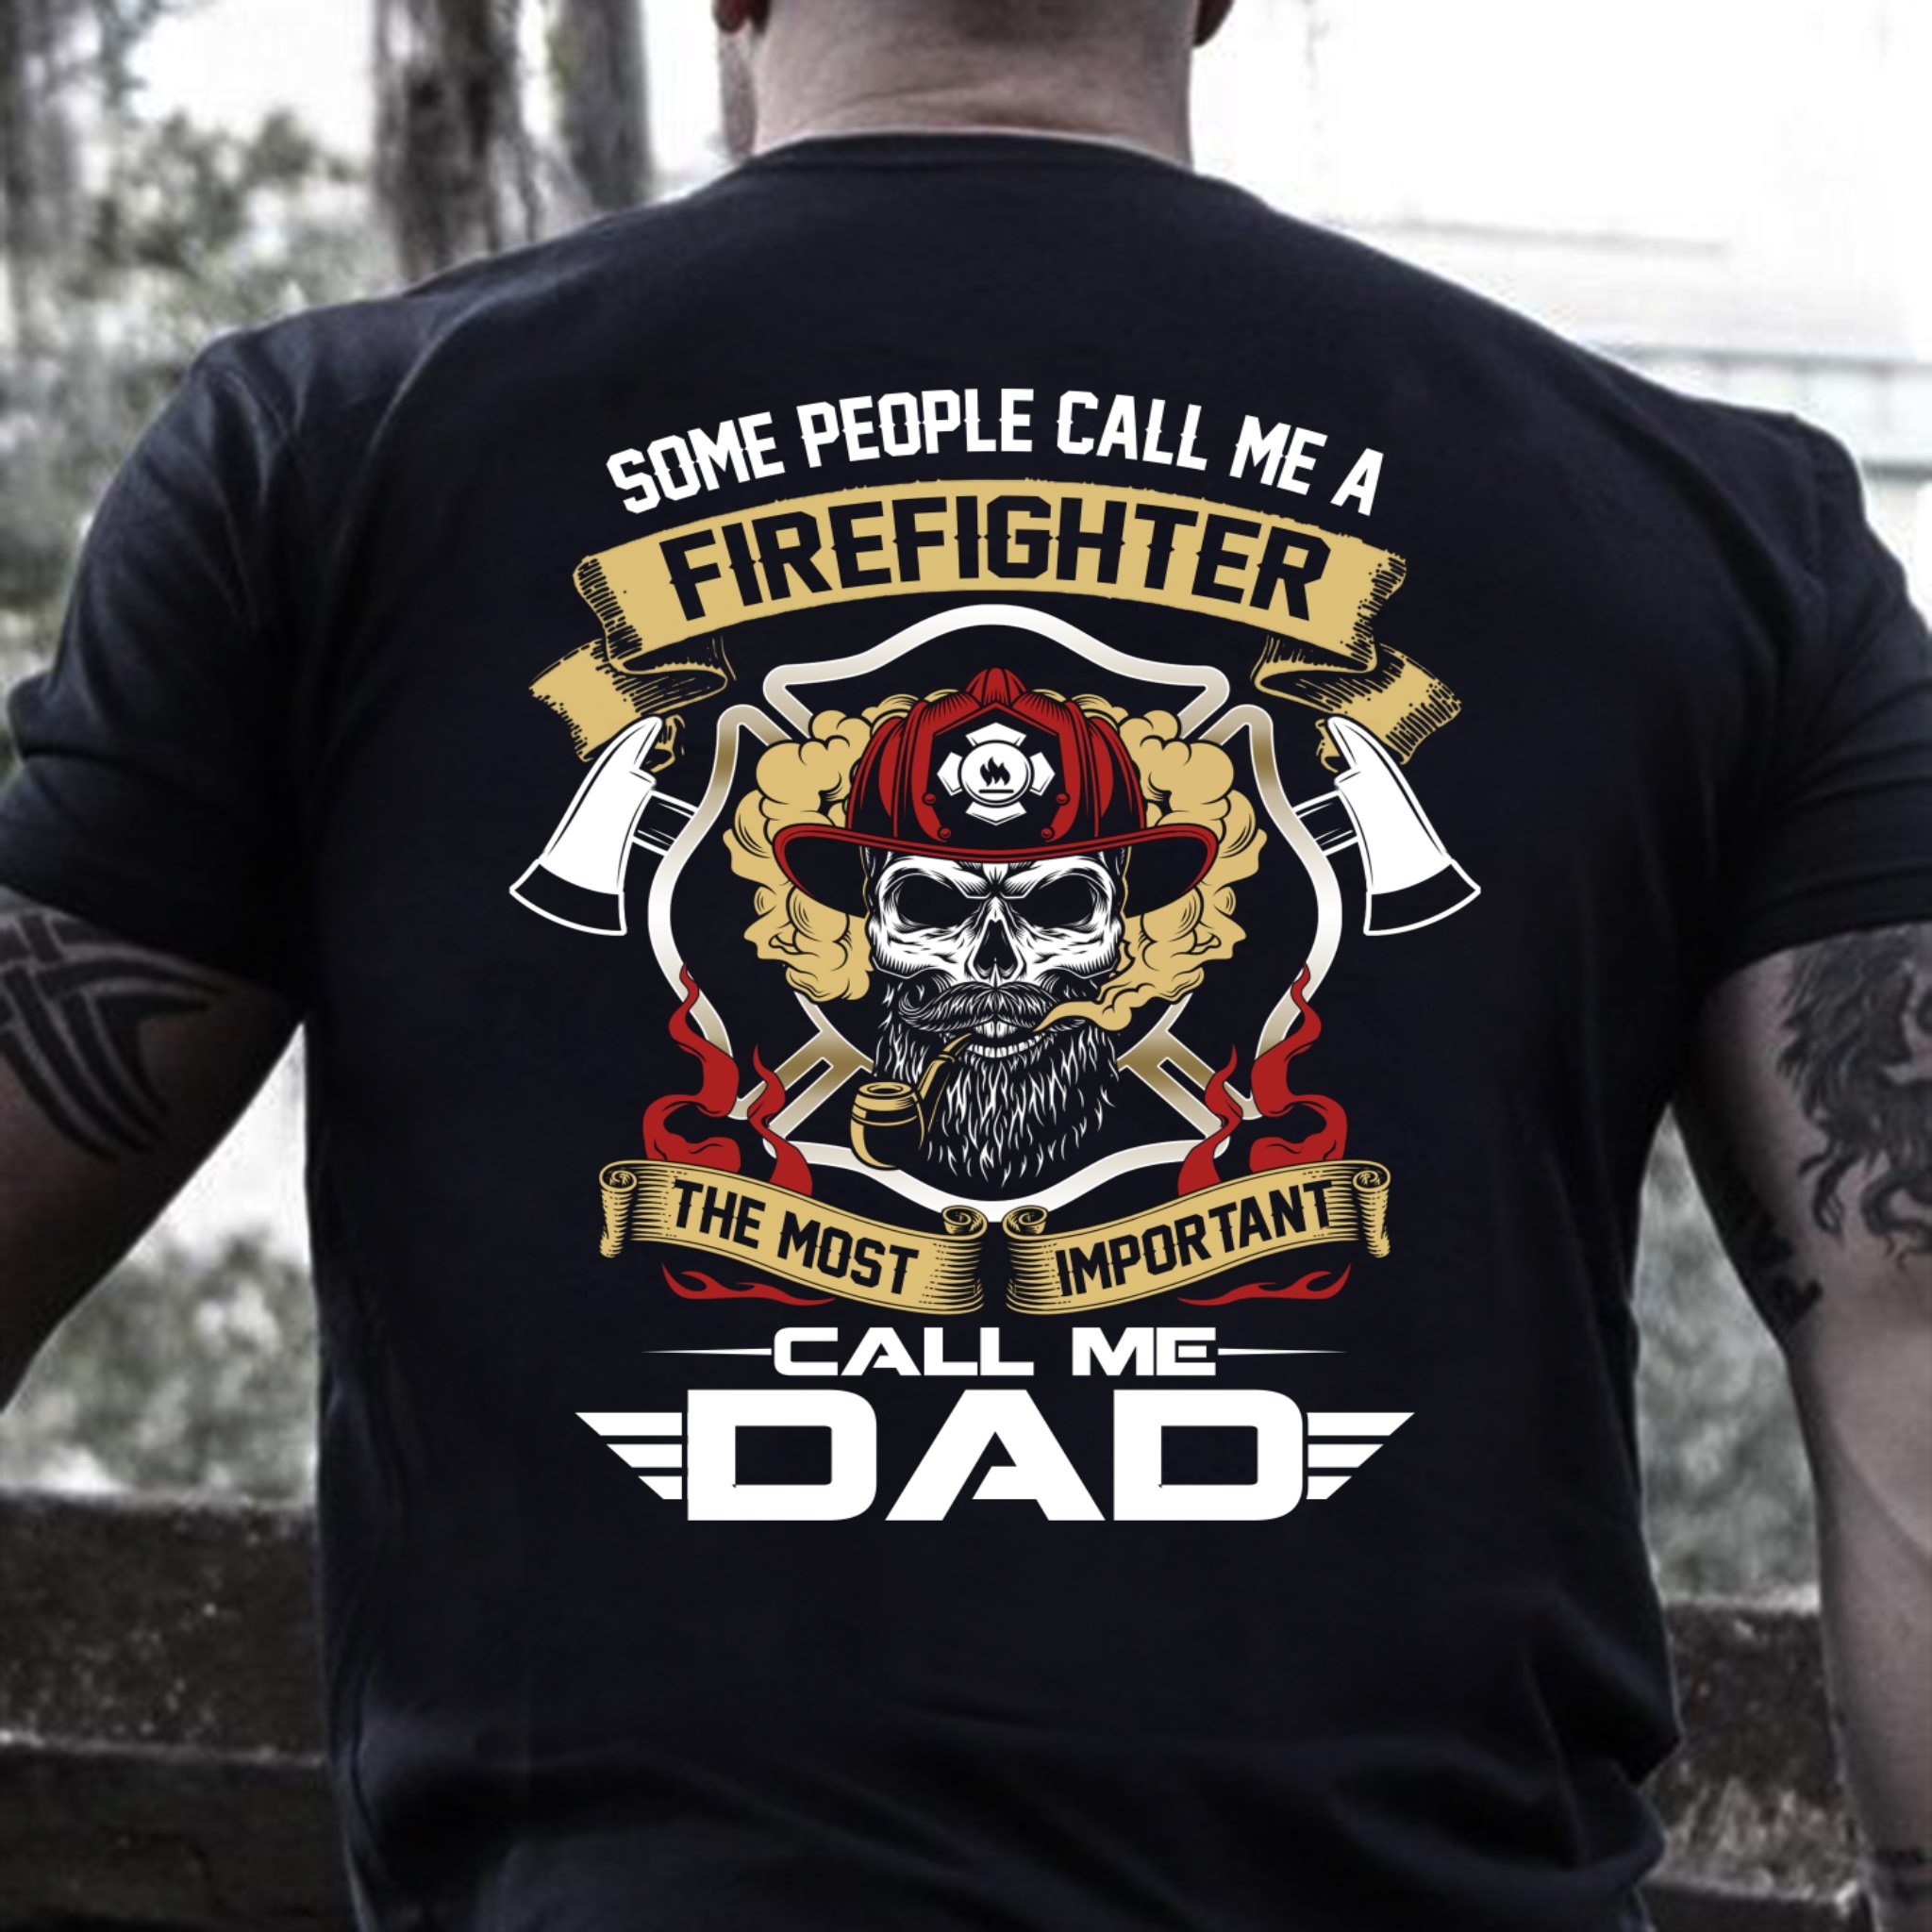 Father's Day Gift, Gift For Dad, Some People Call Me A Firefighter-The Most Important Call Me Dad Firefighter T-Shirt